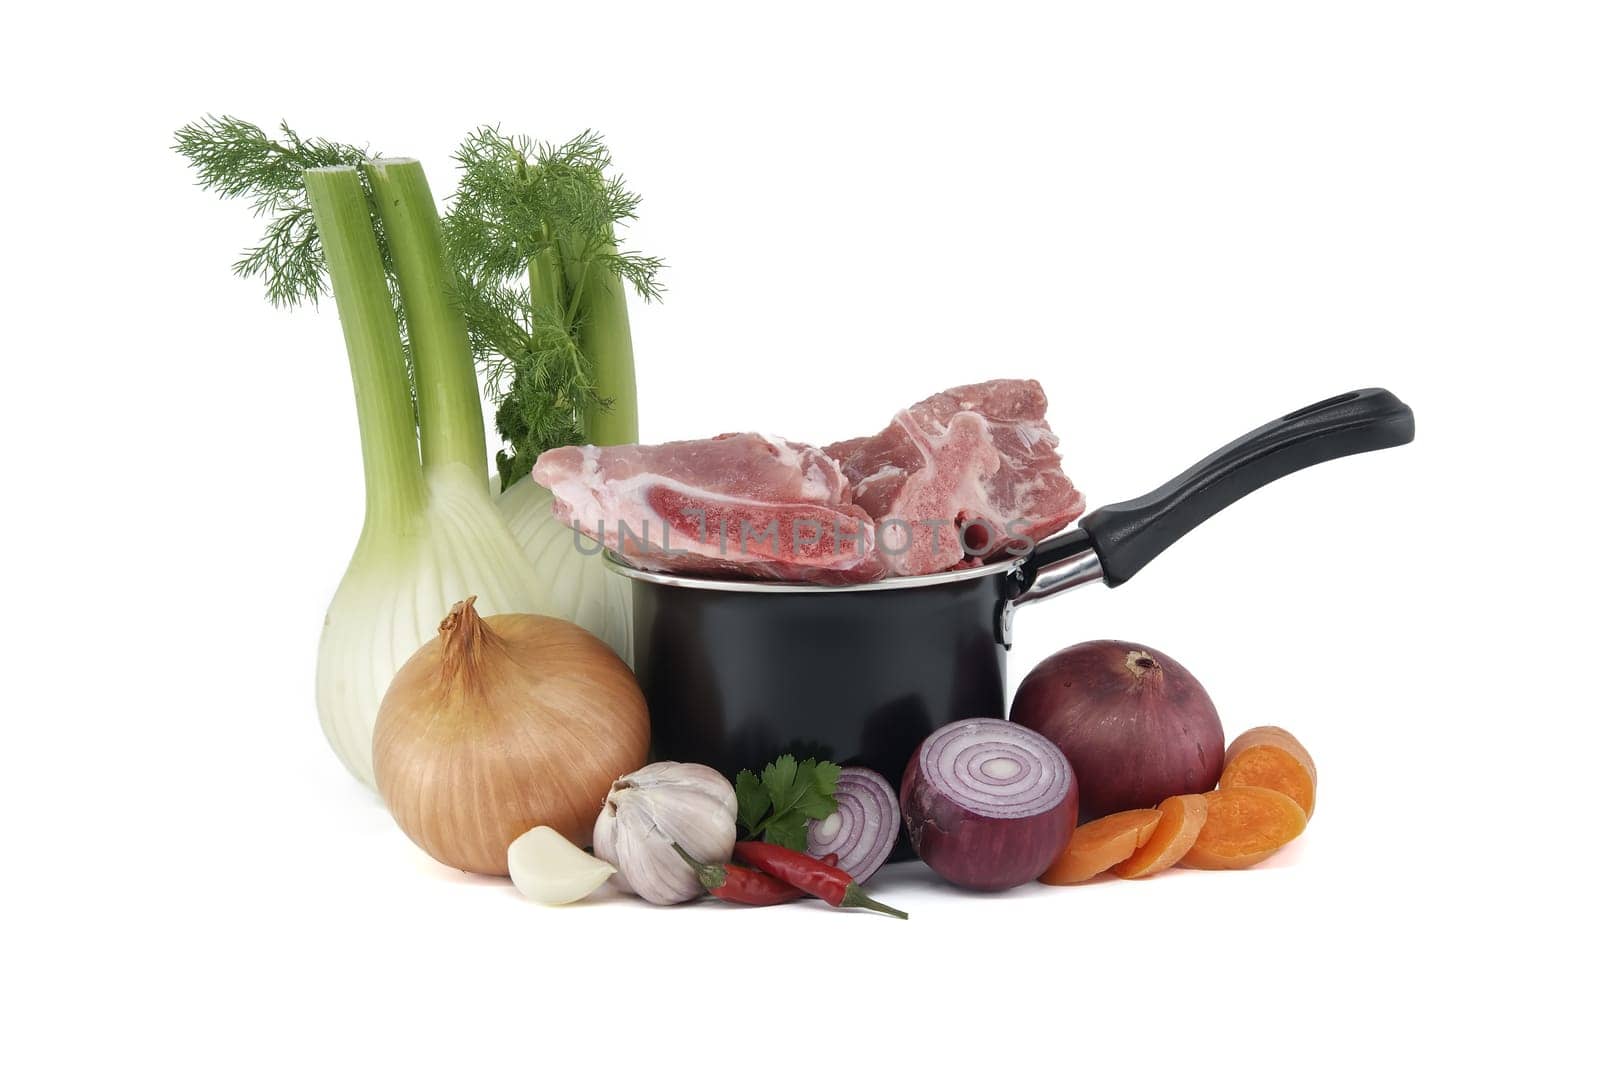 Black saucepan with pieces of raw pork atop. Around the saucepan are sliced vegetables which include onions, carrots, and garlic isolated on white background. Preparation of meat broth